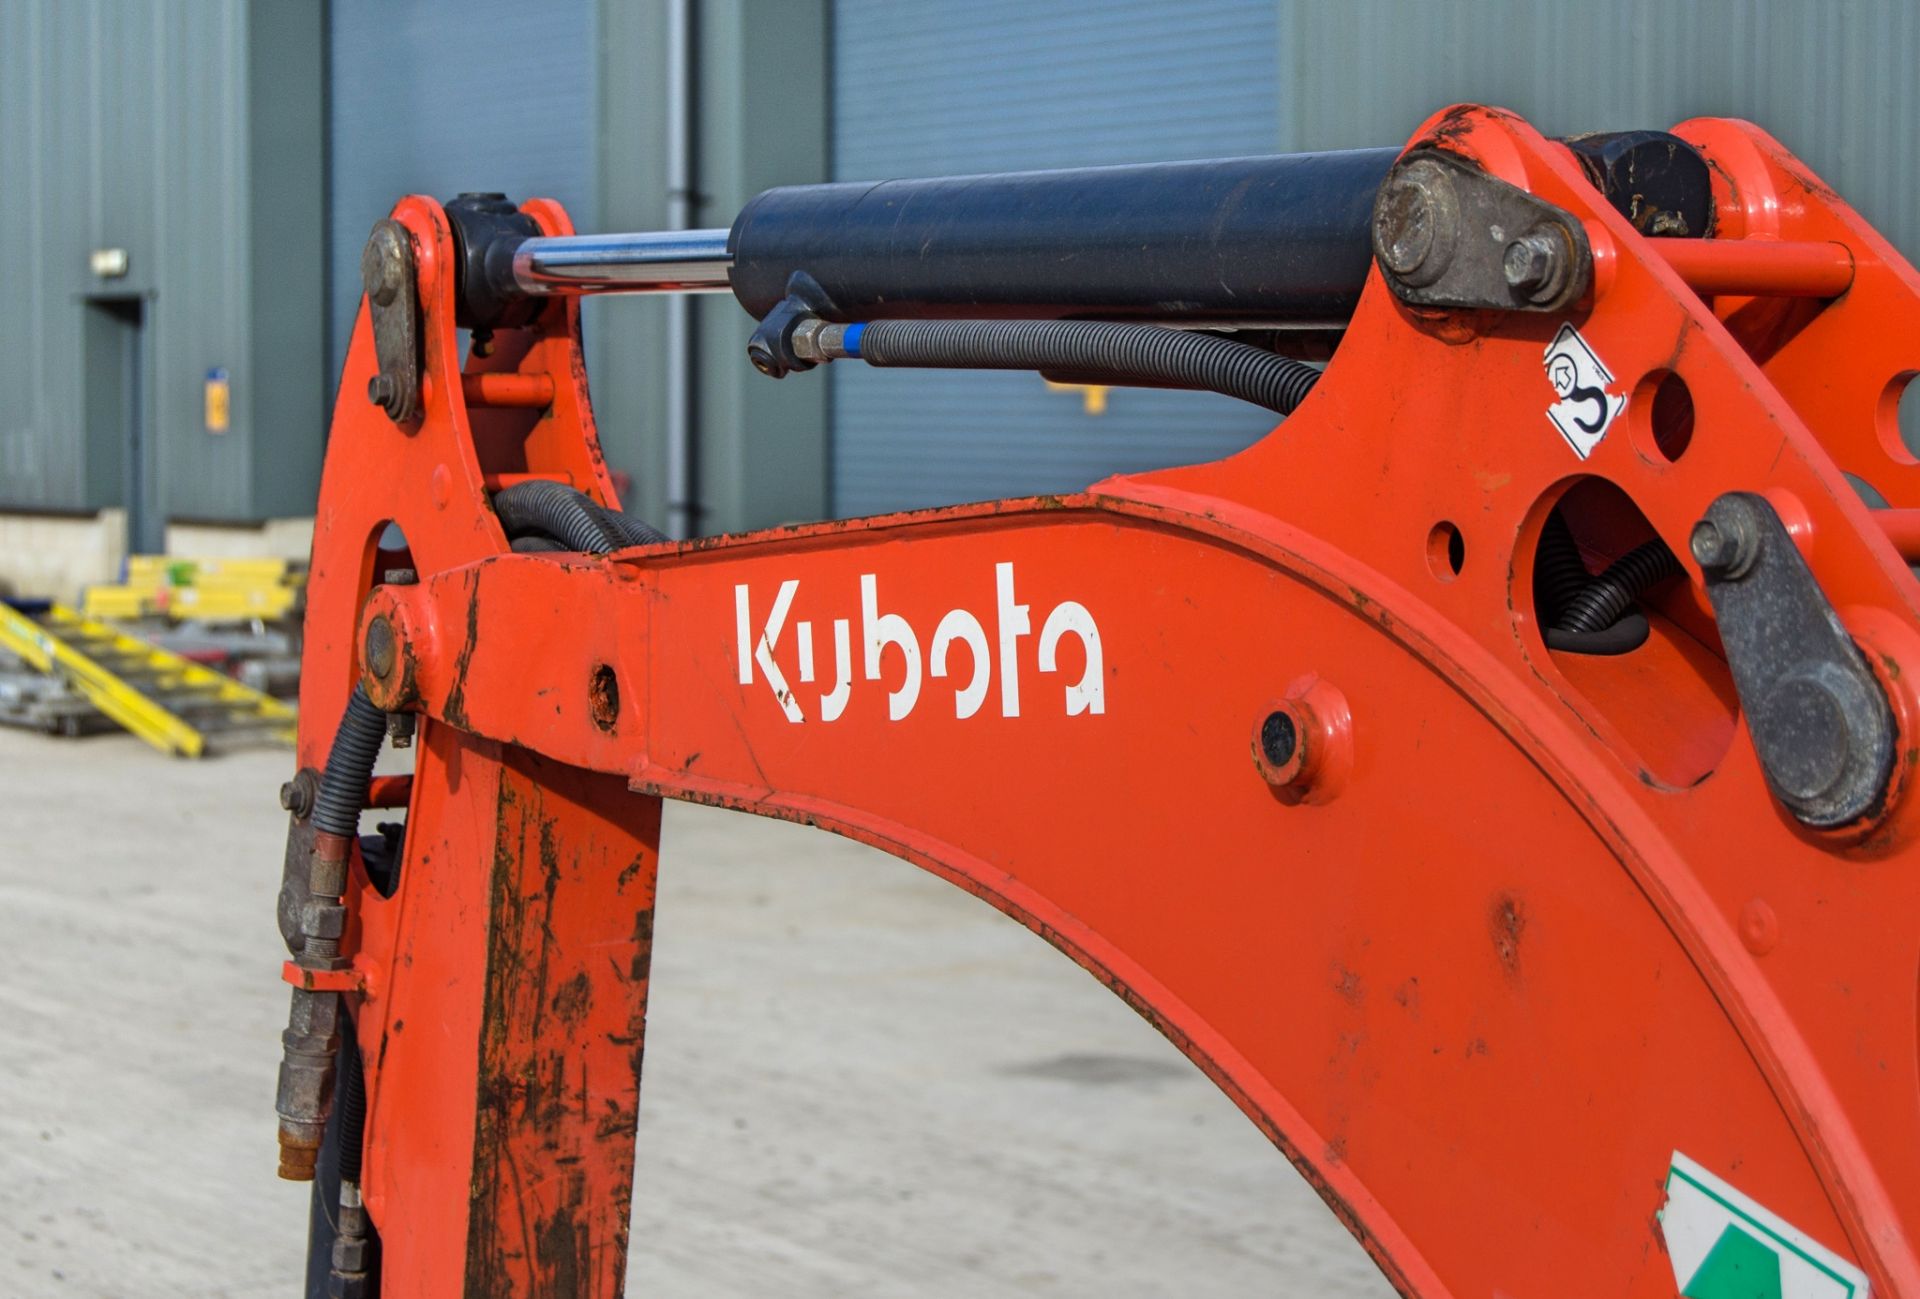 Kubota KX016-4 1.5 tonne rubber tracked excavator Year: 2017 S/N: 61044 Recorded Hours: 2260 - Image 16 of 26